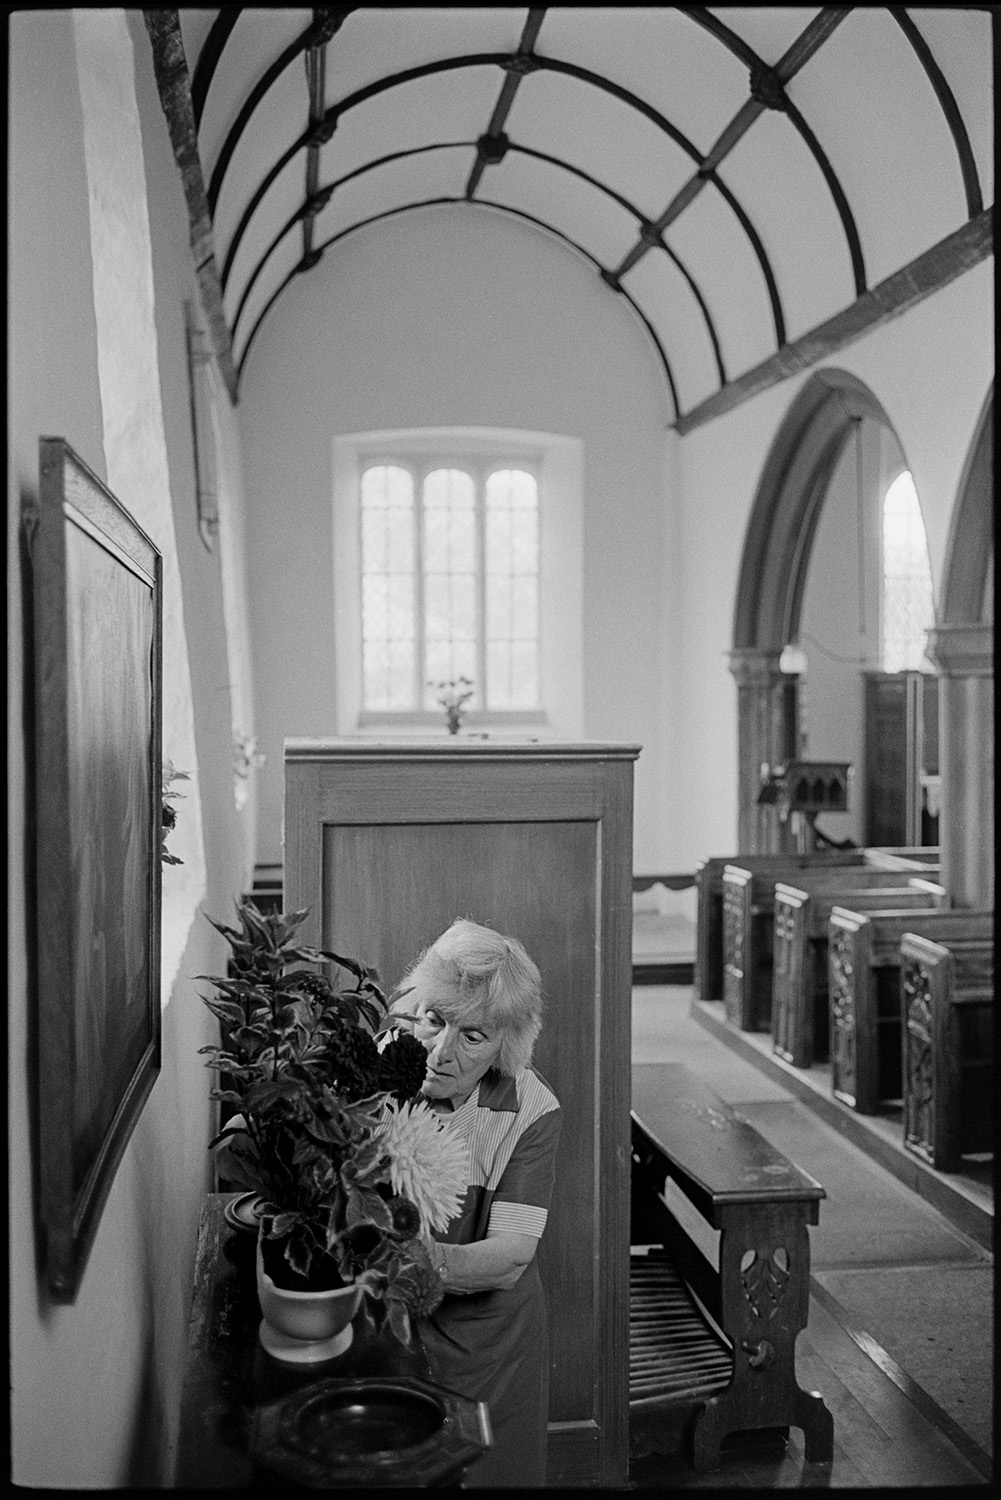 Women decorating church for Harvest Festival, flowers. Religious painting on wall. 
[Evelyn Folland making a floral decoration near the organ for the Harvest Festival  at Dowland Church. Carved wooden pews can be seen in the background.]